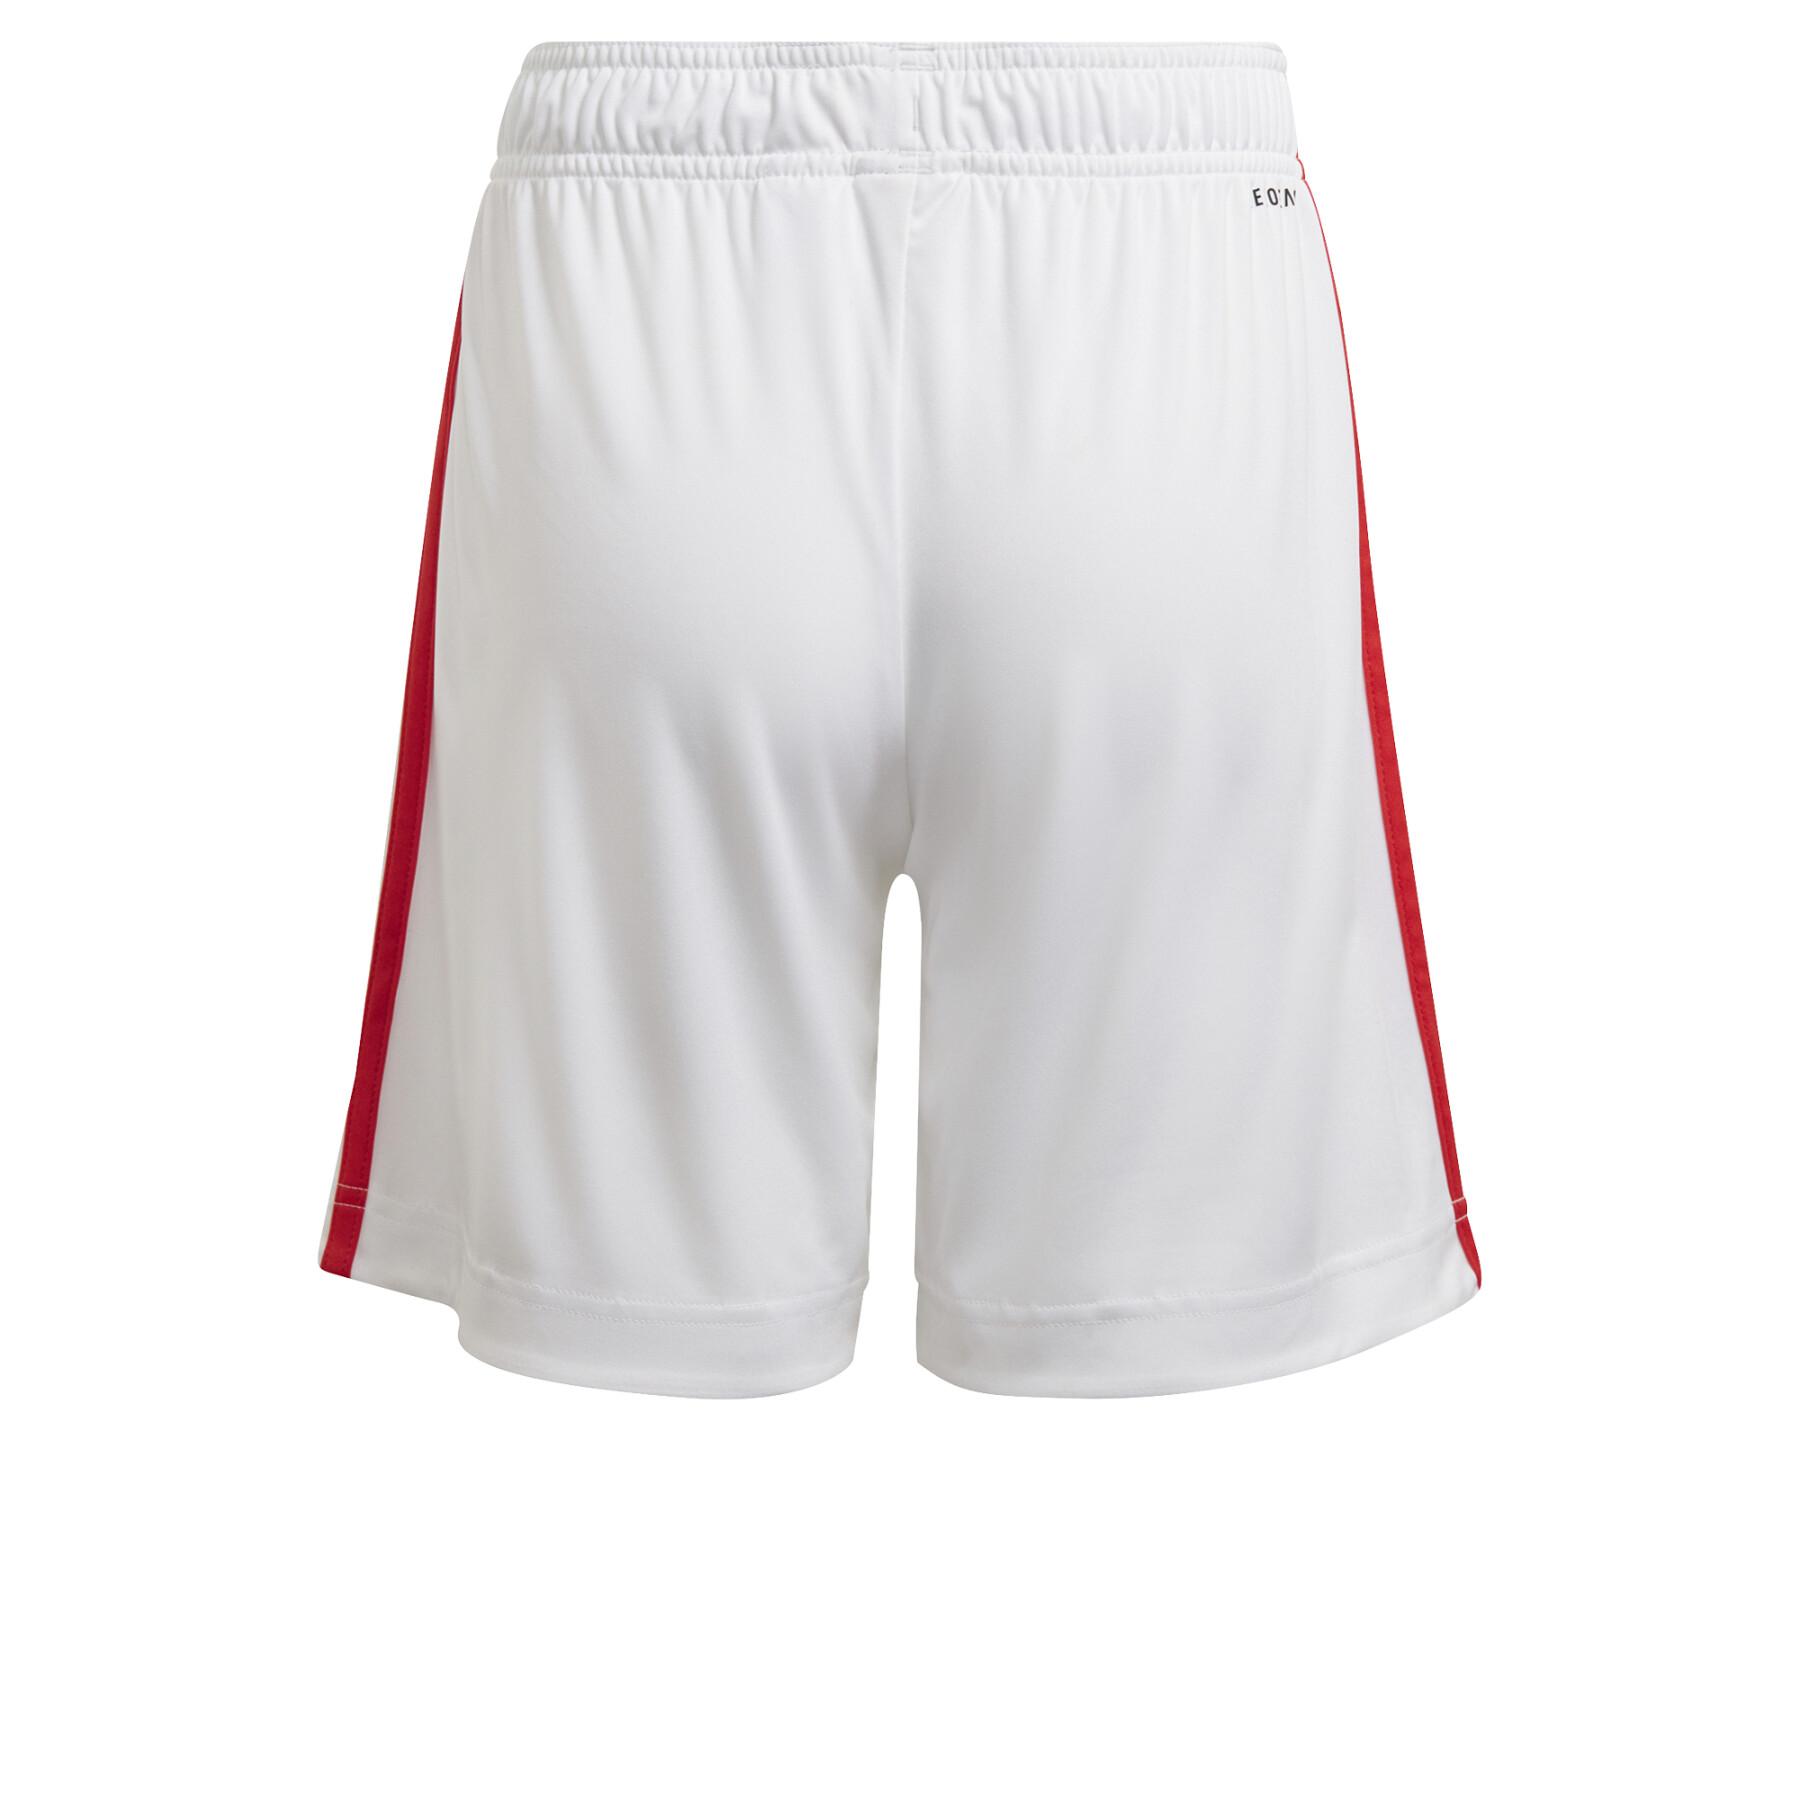 Home shorts Benfica 2021/22